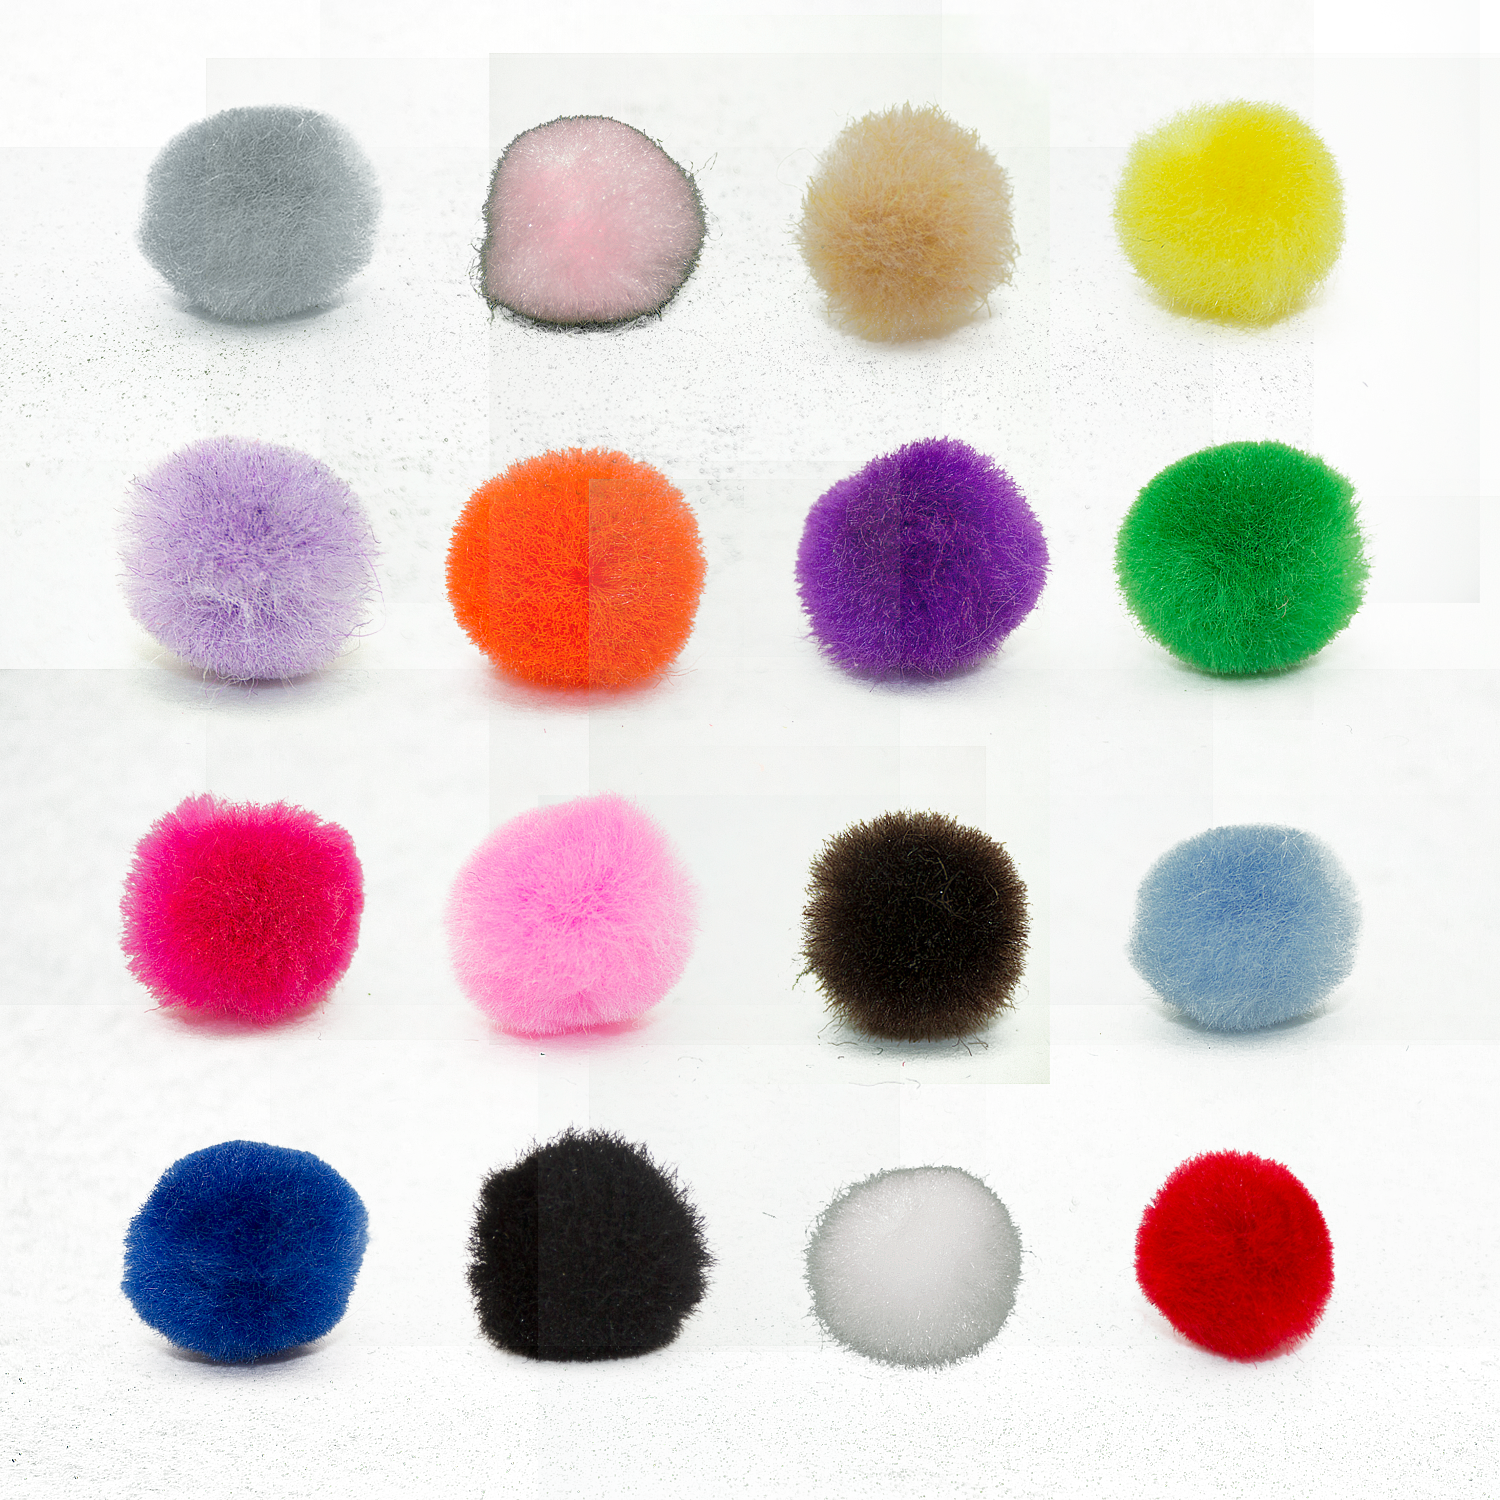 Genuine Wholesale Craft Pom Poms Wholesale For Old World Style 